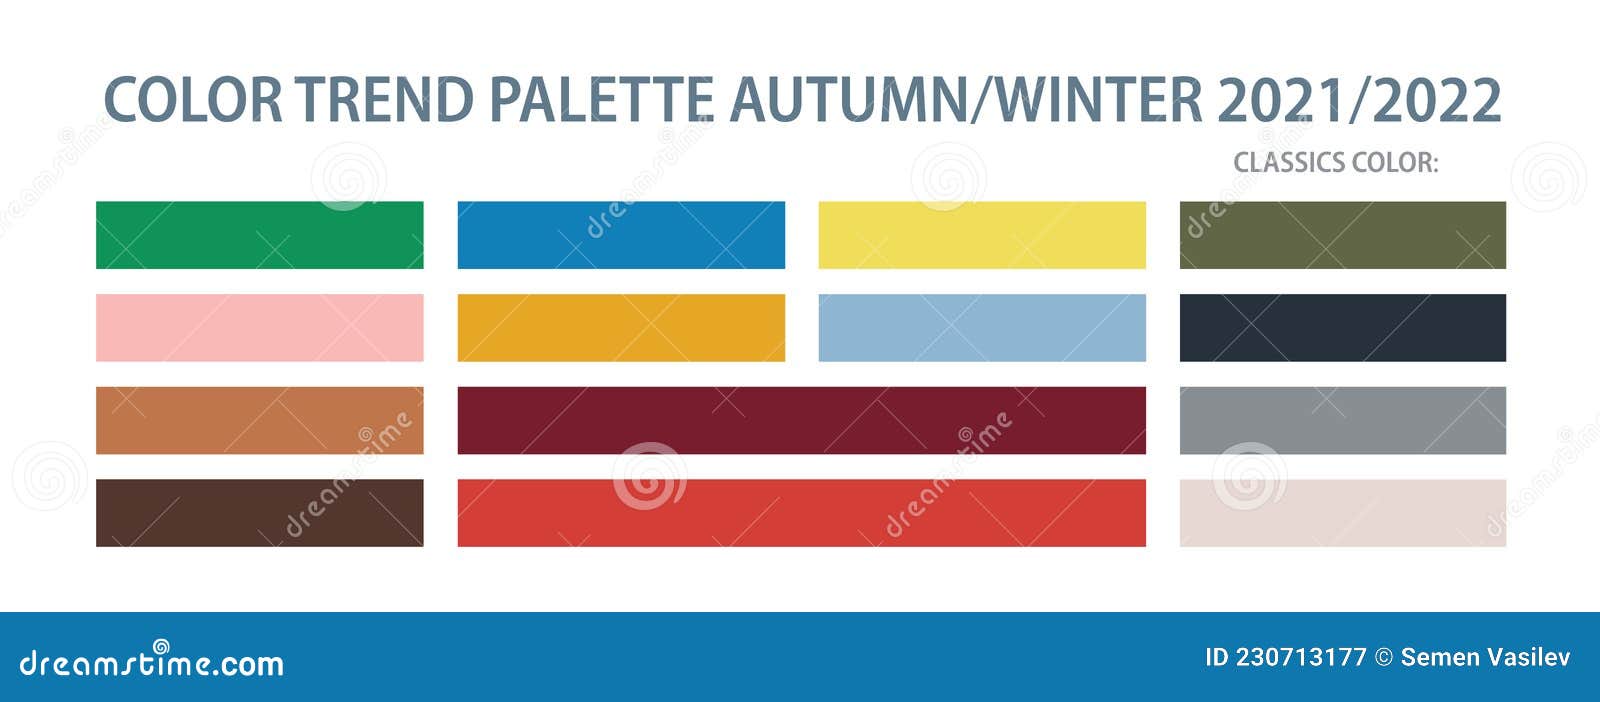 Color Trend Palette 2021, 2022 Autumn and Winter. Stock Vector ...